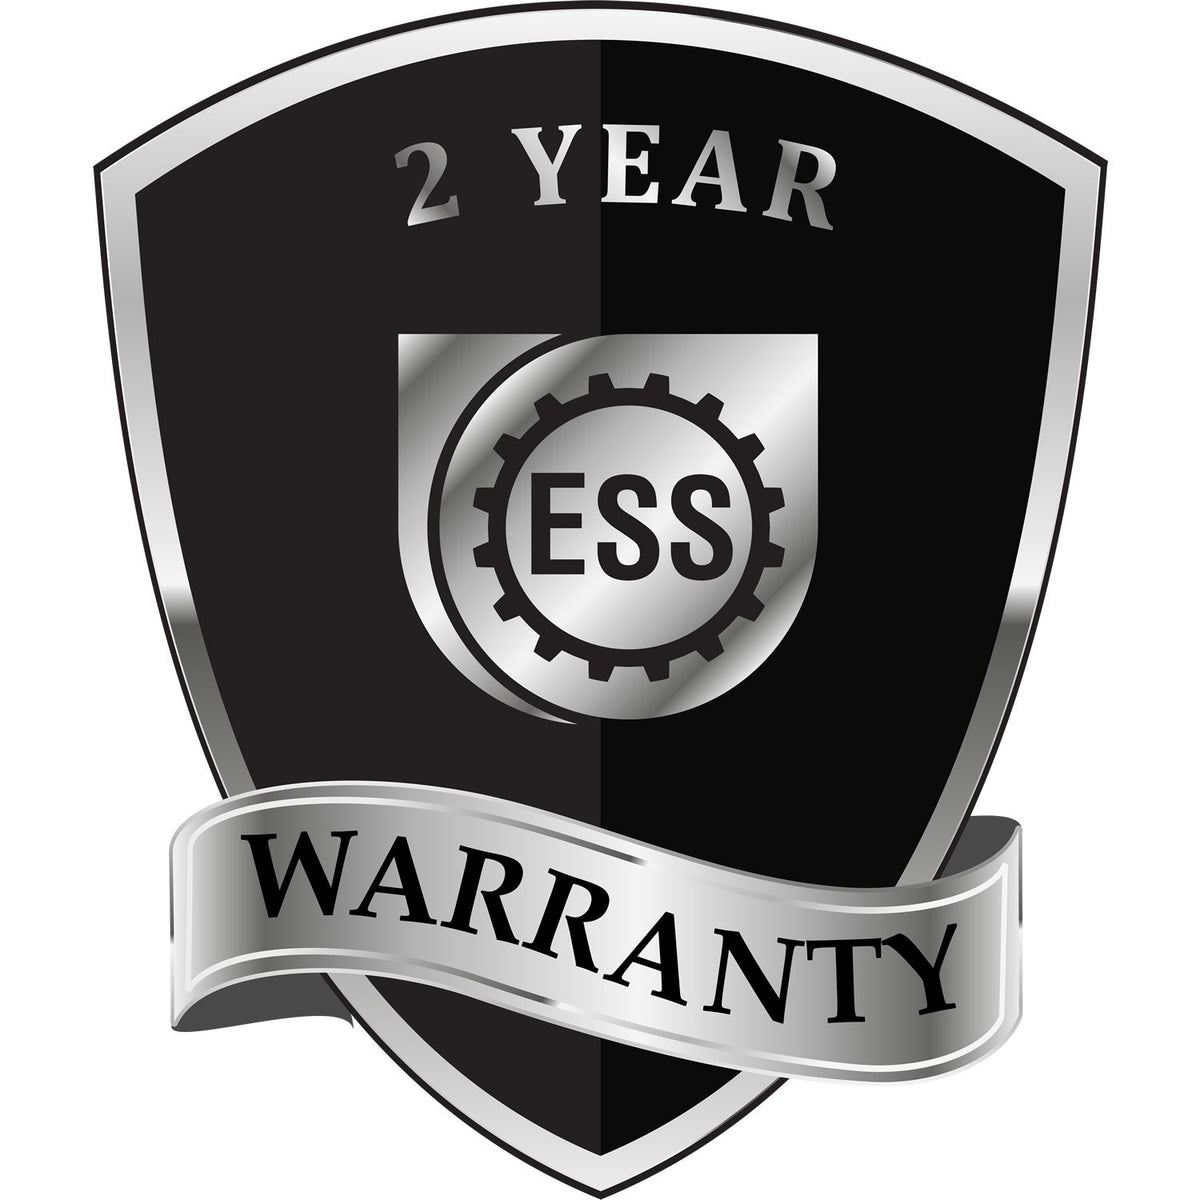 A black and silver badge or emblem showing warranty information for the Hybrid Oklahoma Geologist Seal